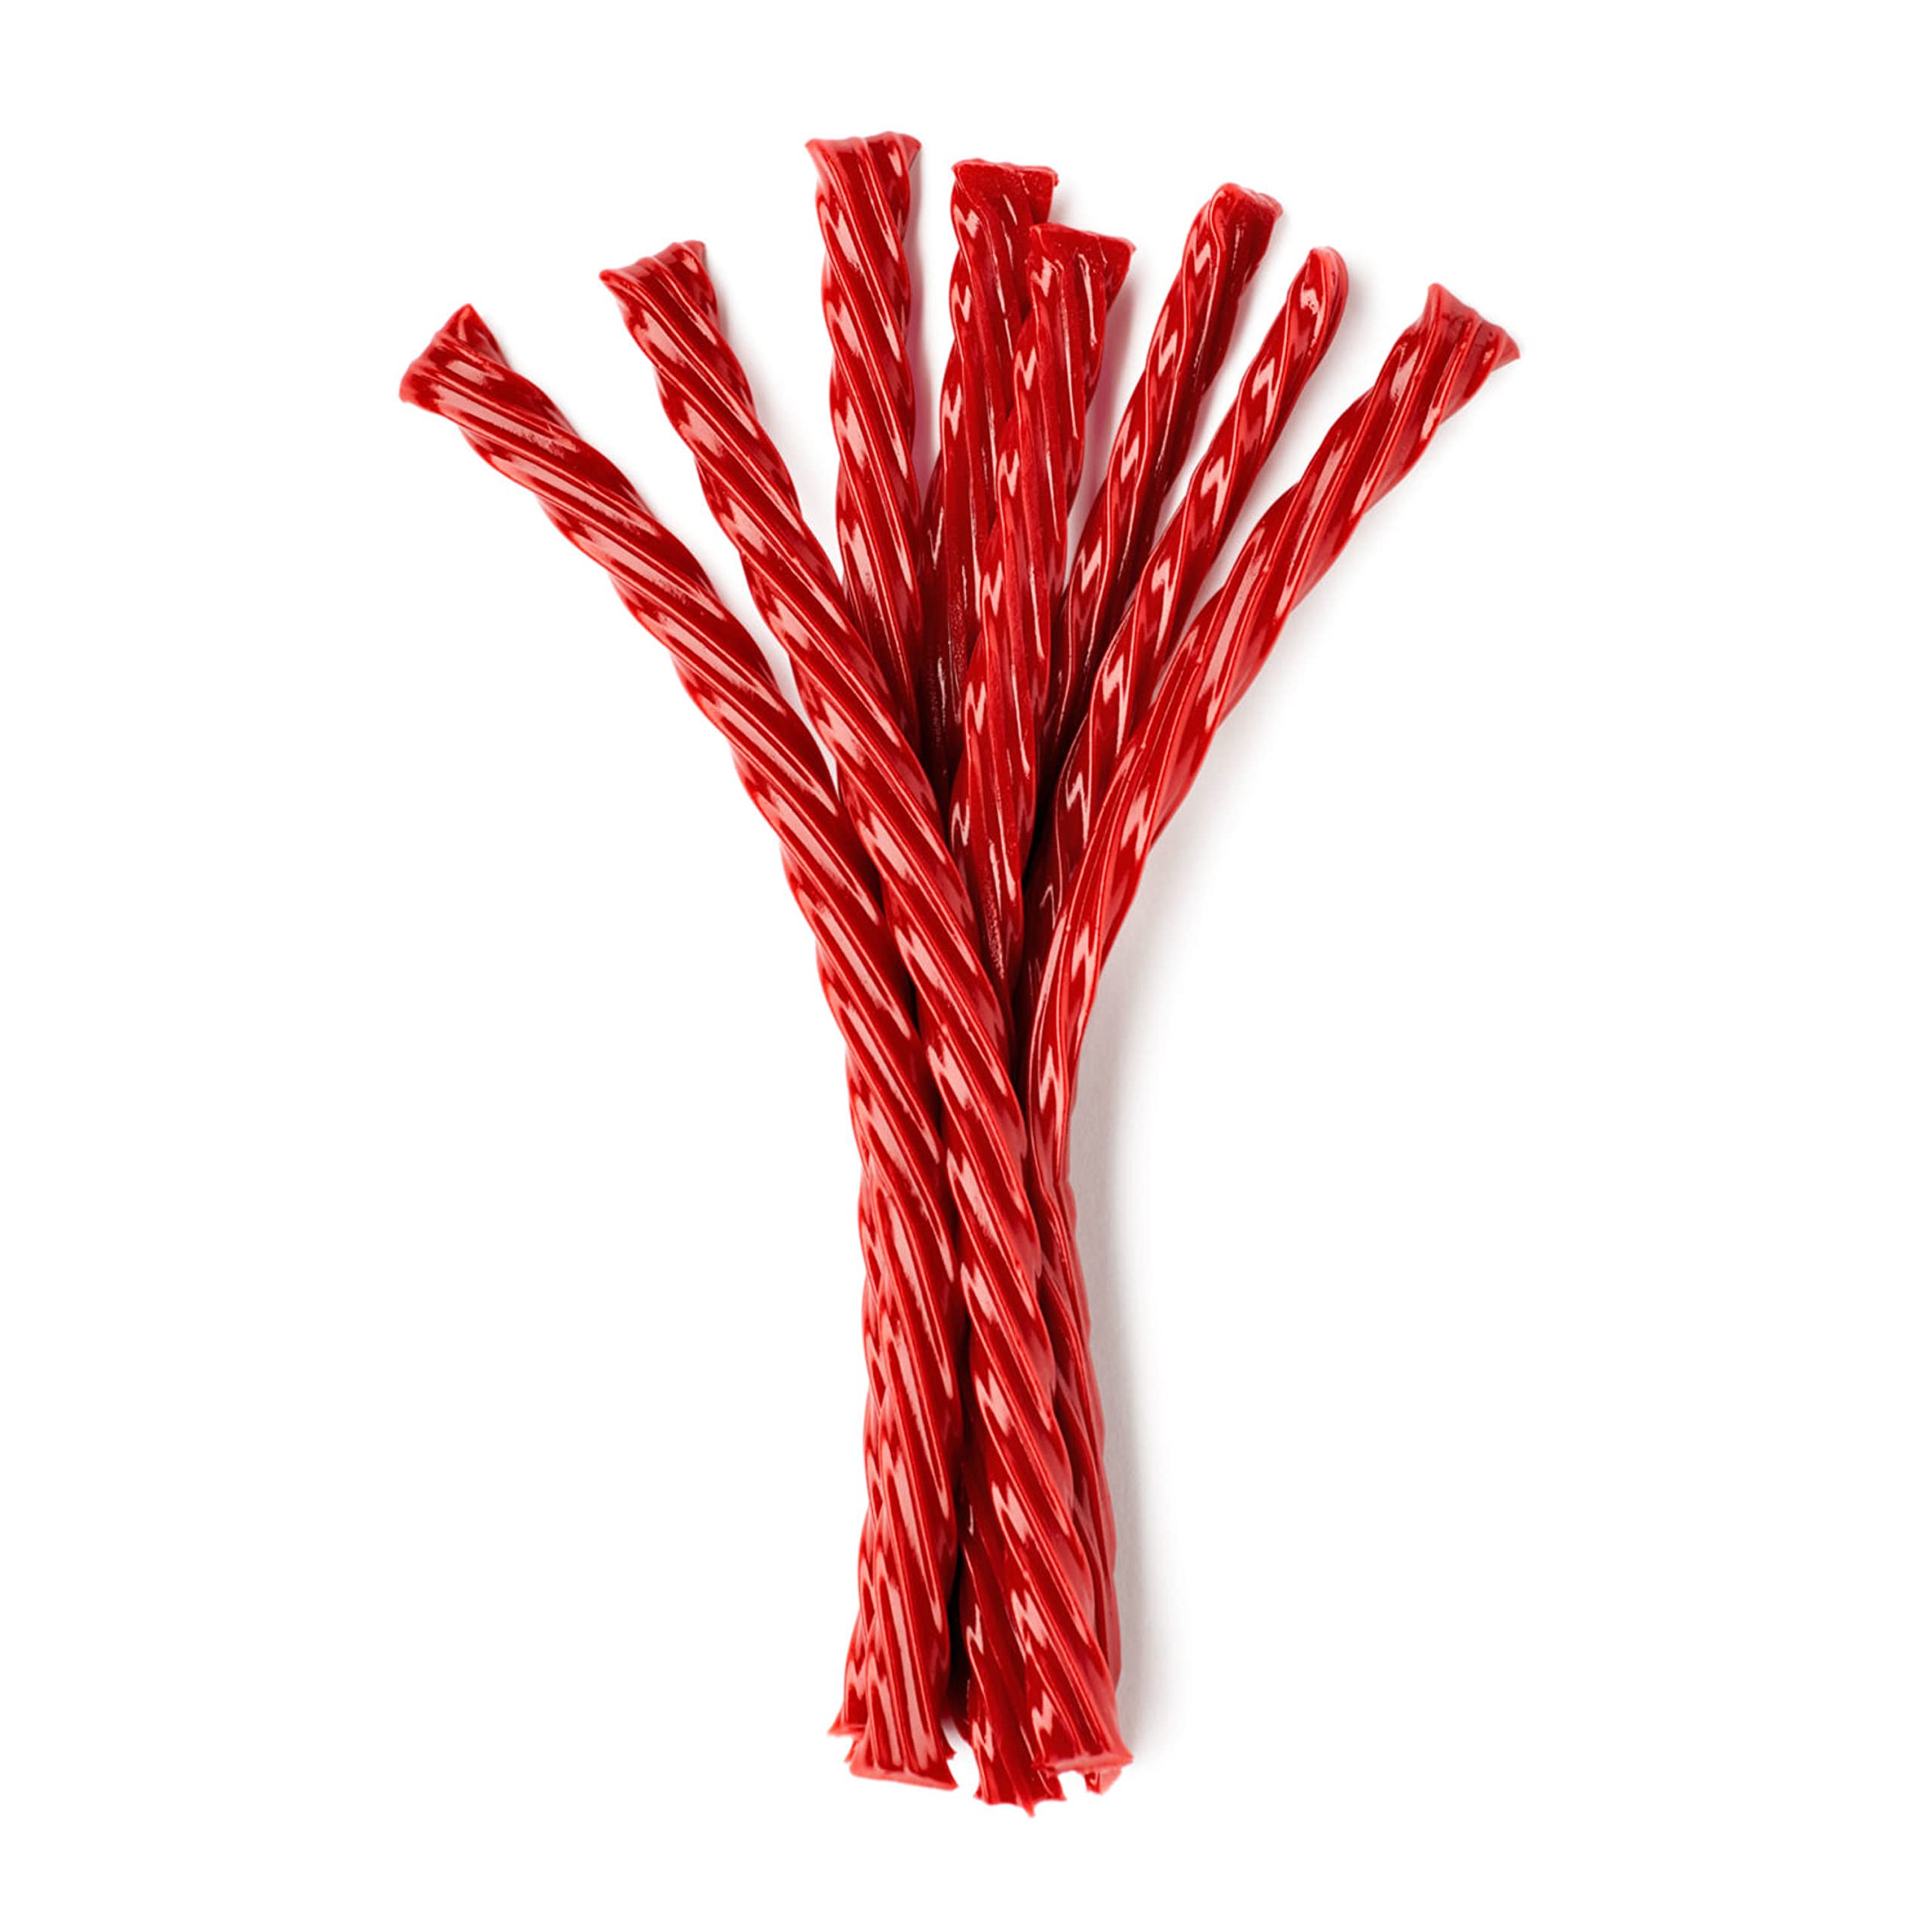 TWIZZLERS Twists Strawberry Flavored Licorice Style, Low Fat Candy Tub, 5 lb